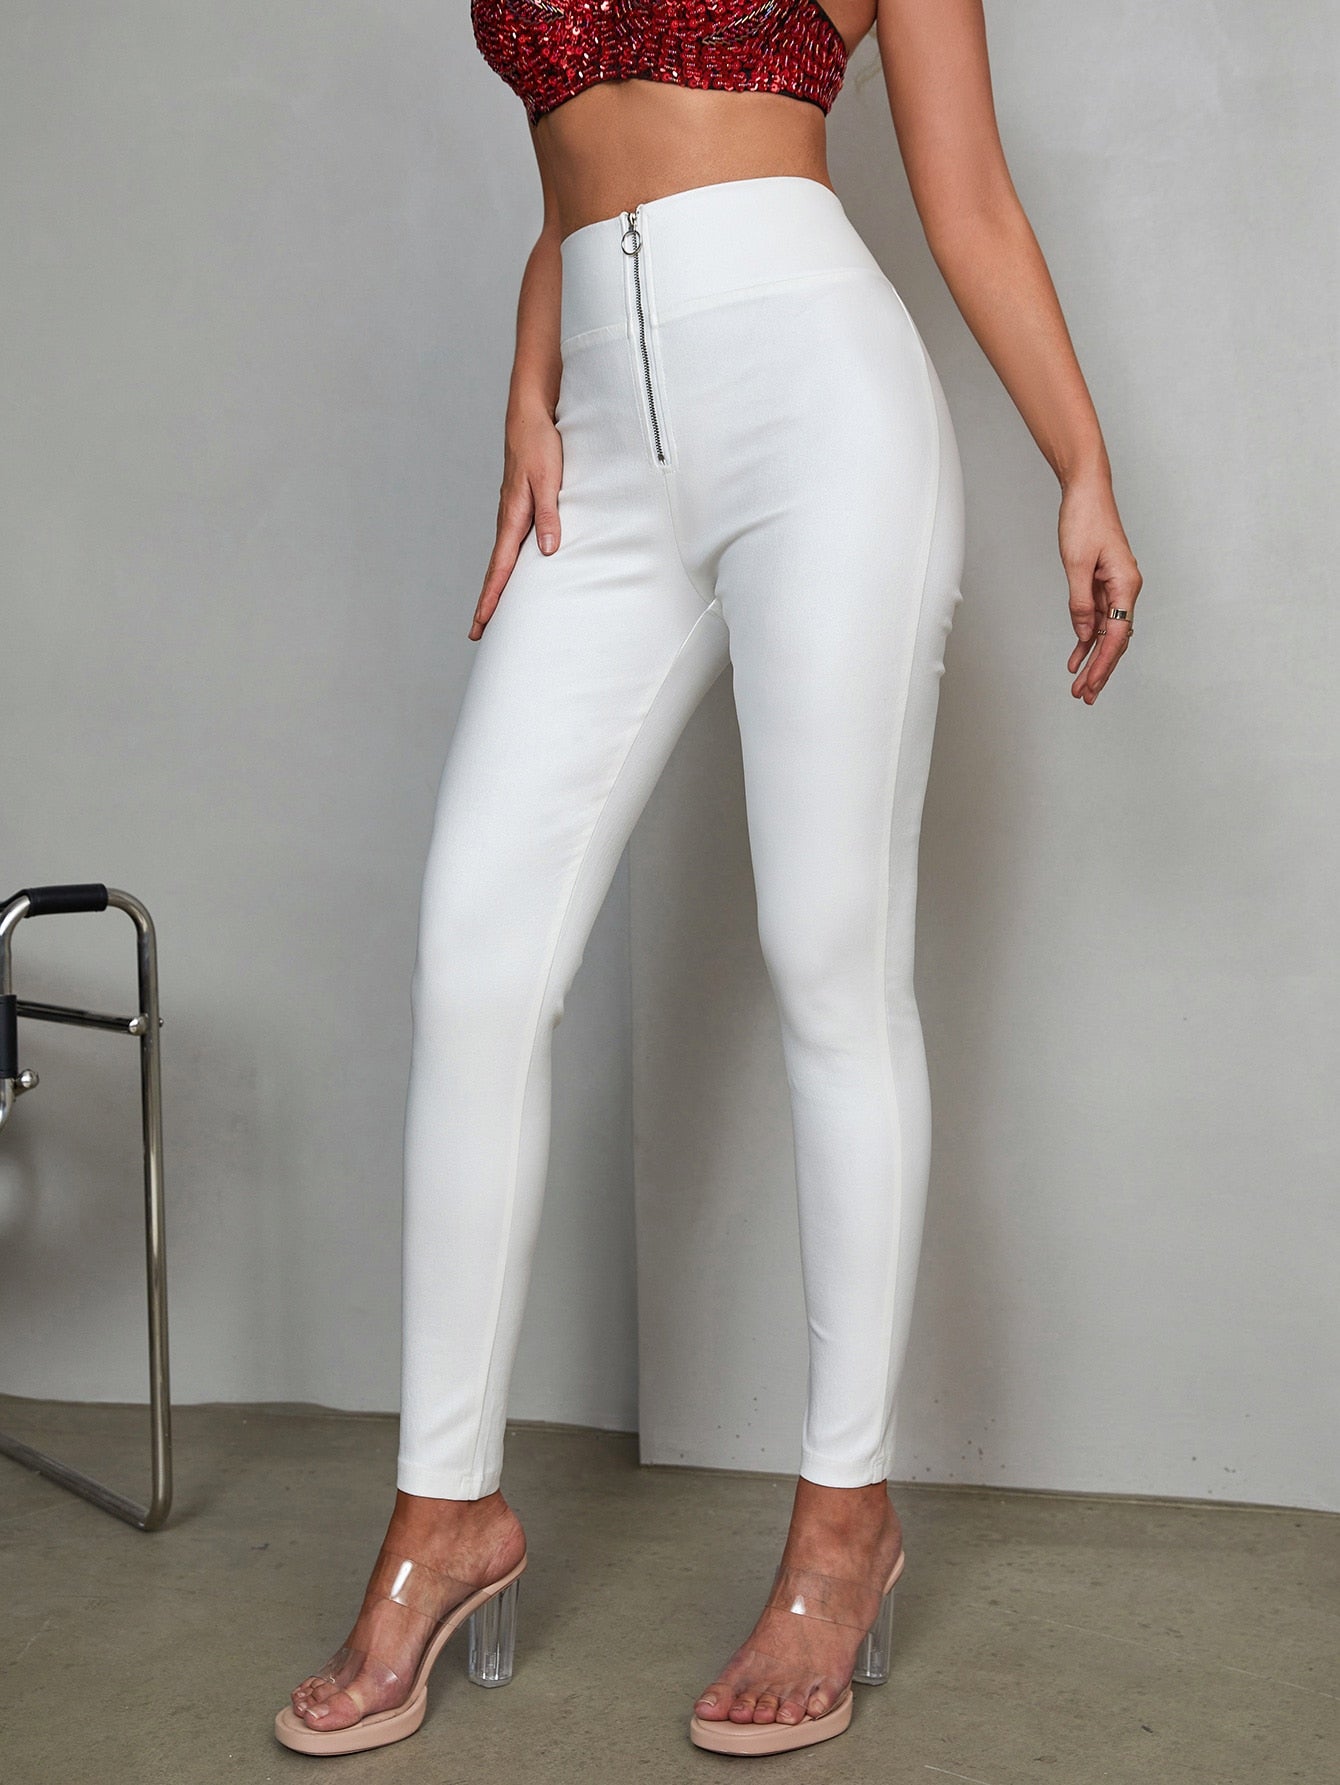 High-Waist Stretchy Zipper Front Thermal Lined PU Leather Ankle Skinny Tapered Pants